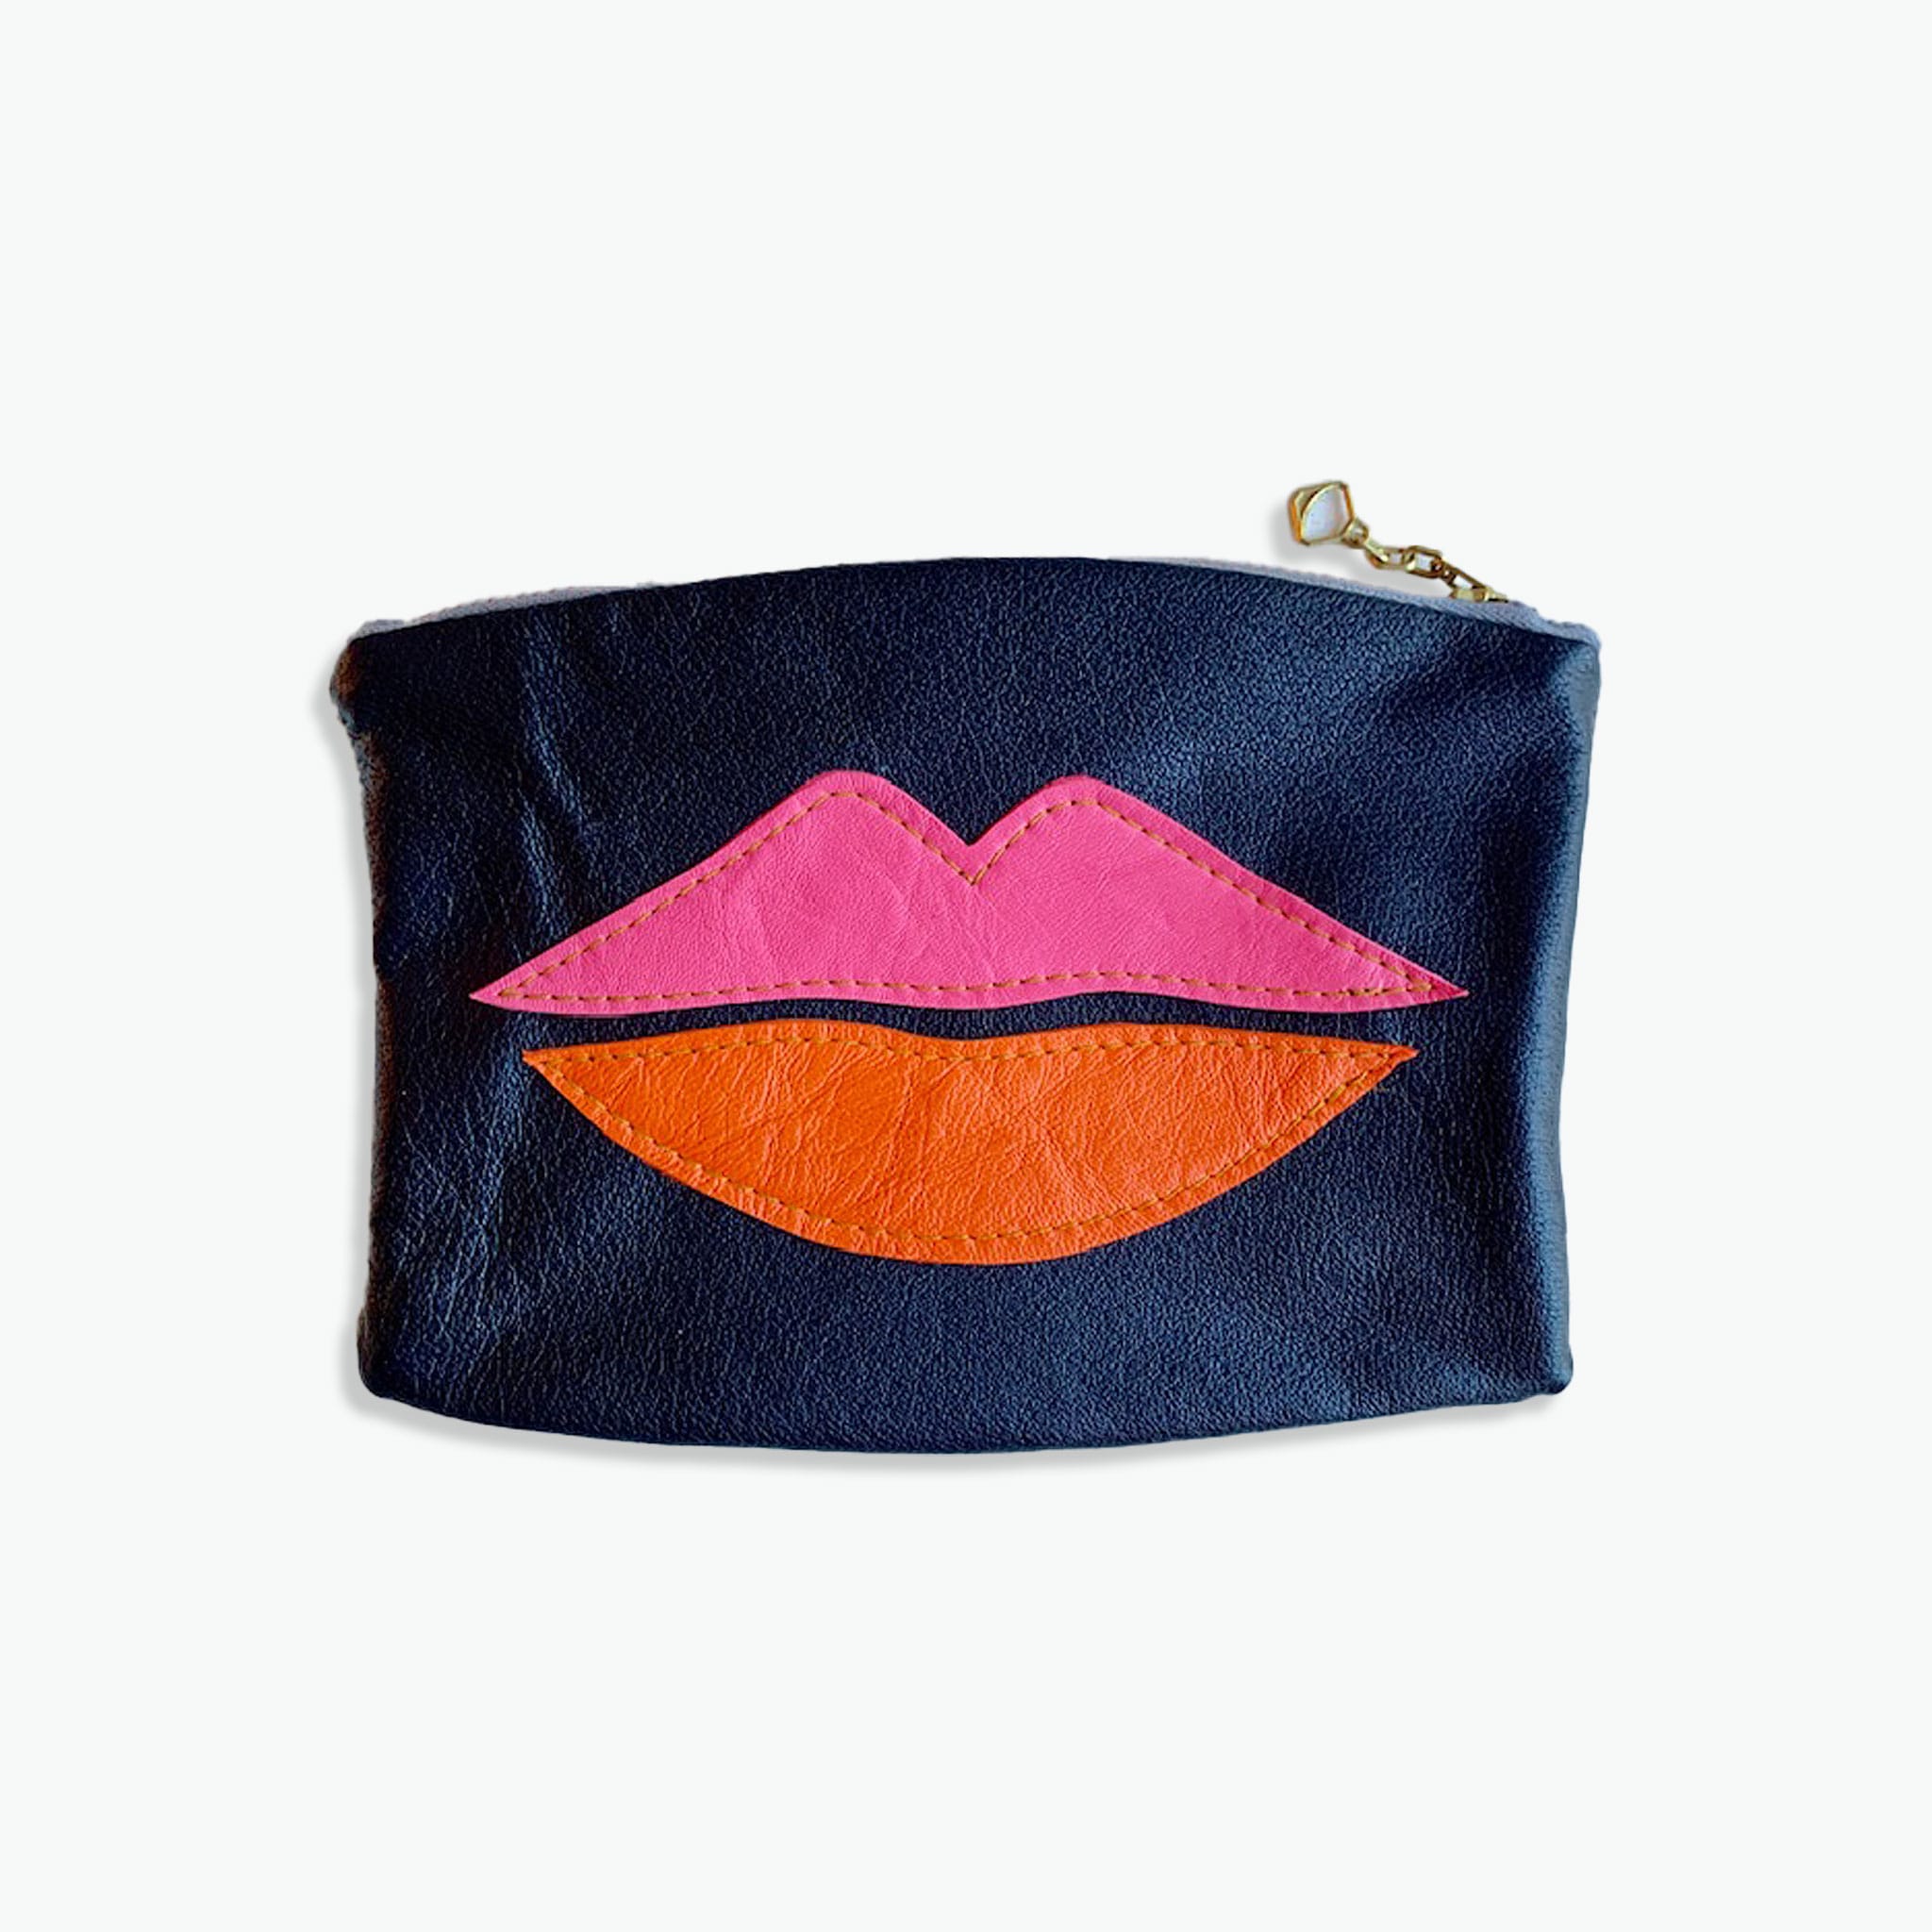 Purse Your Lips Handmade Bags - an Exhibitor Spotlight by Woodland Crafts